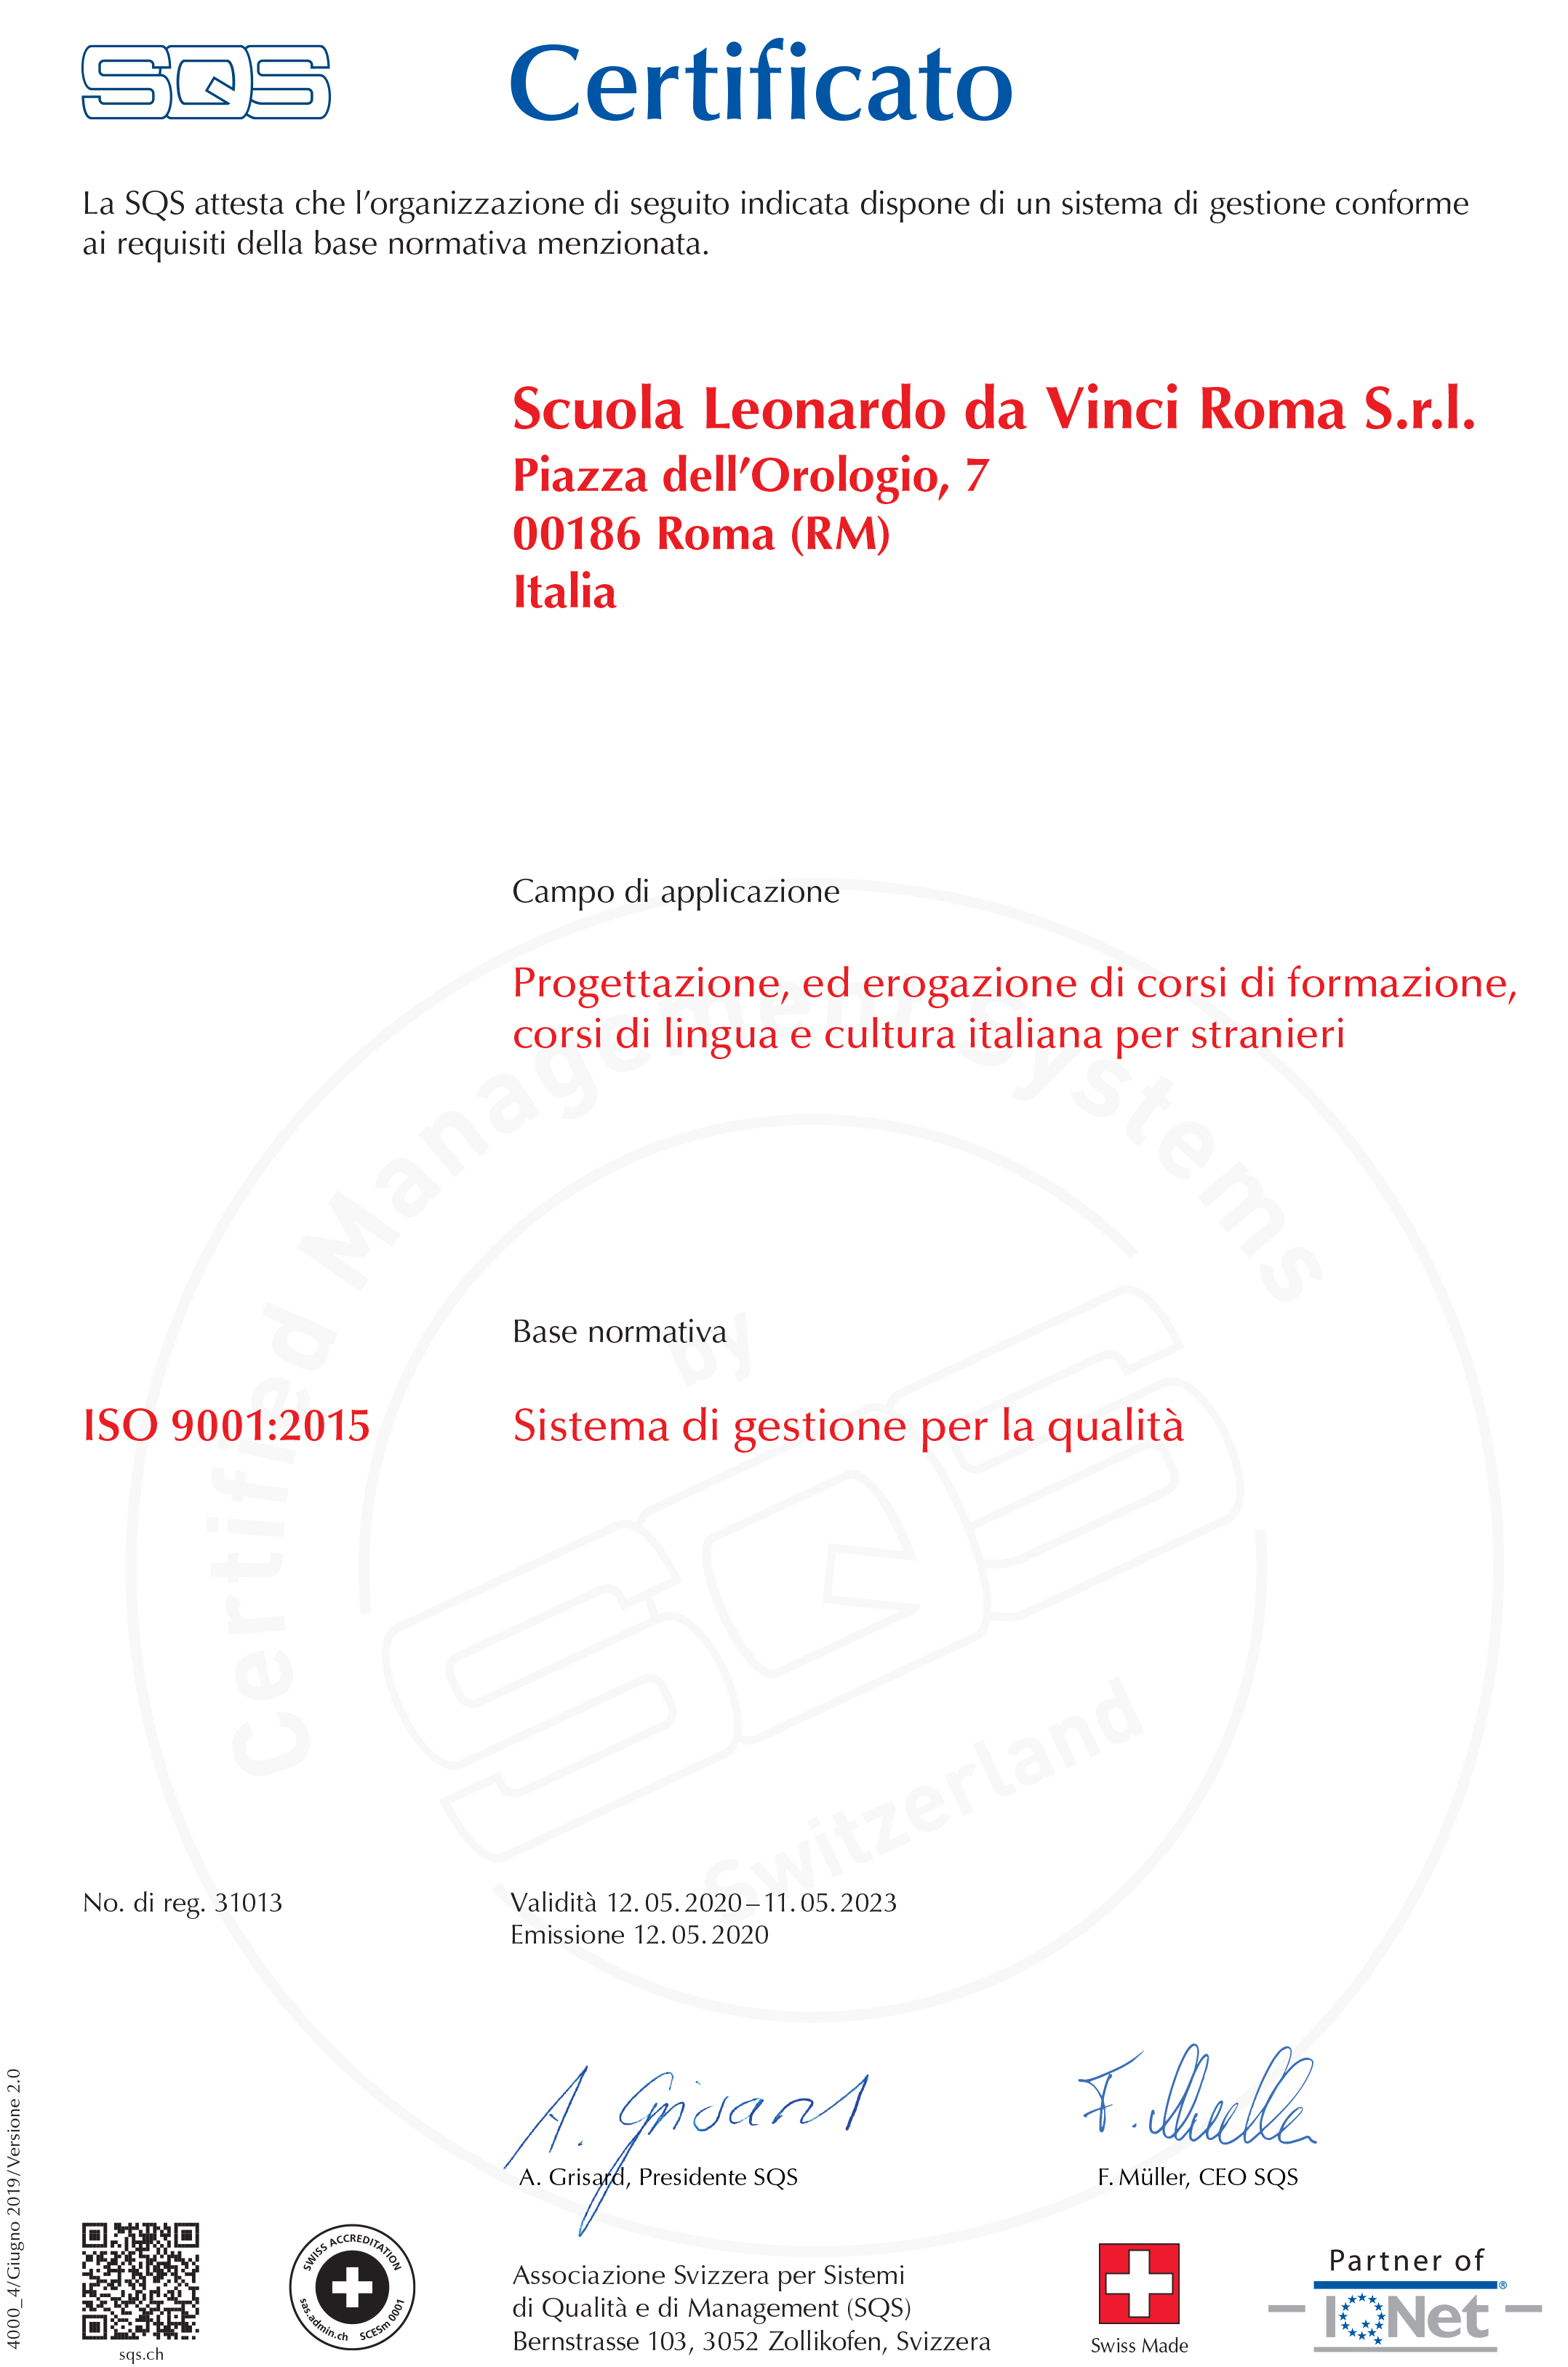 Our Italian school in Rome is certified to meet ISO 9001:2015, the internationally recognized standard for quality management systems